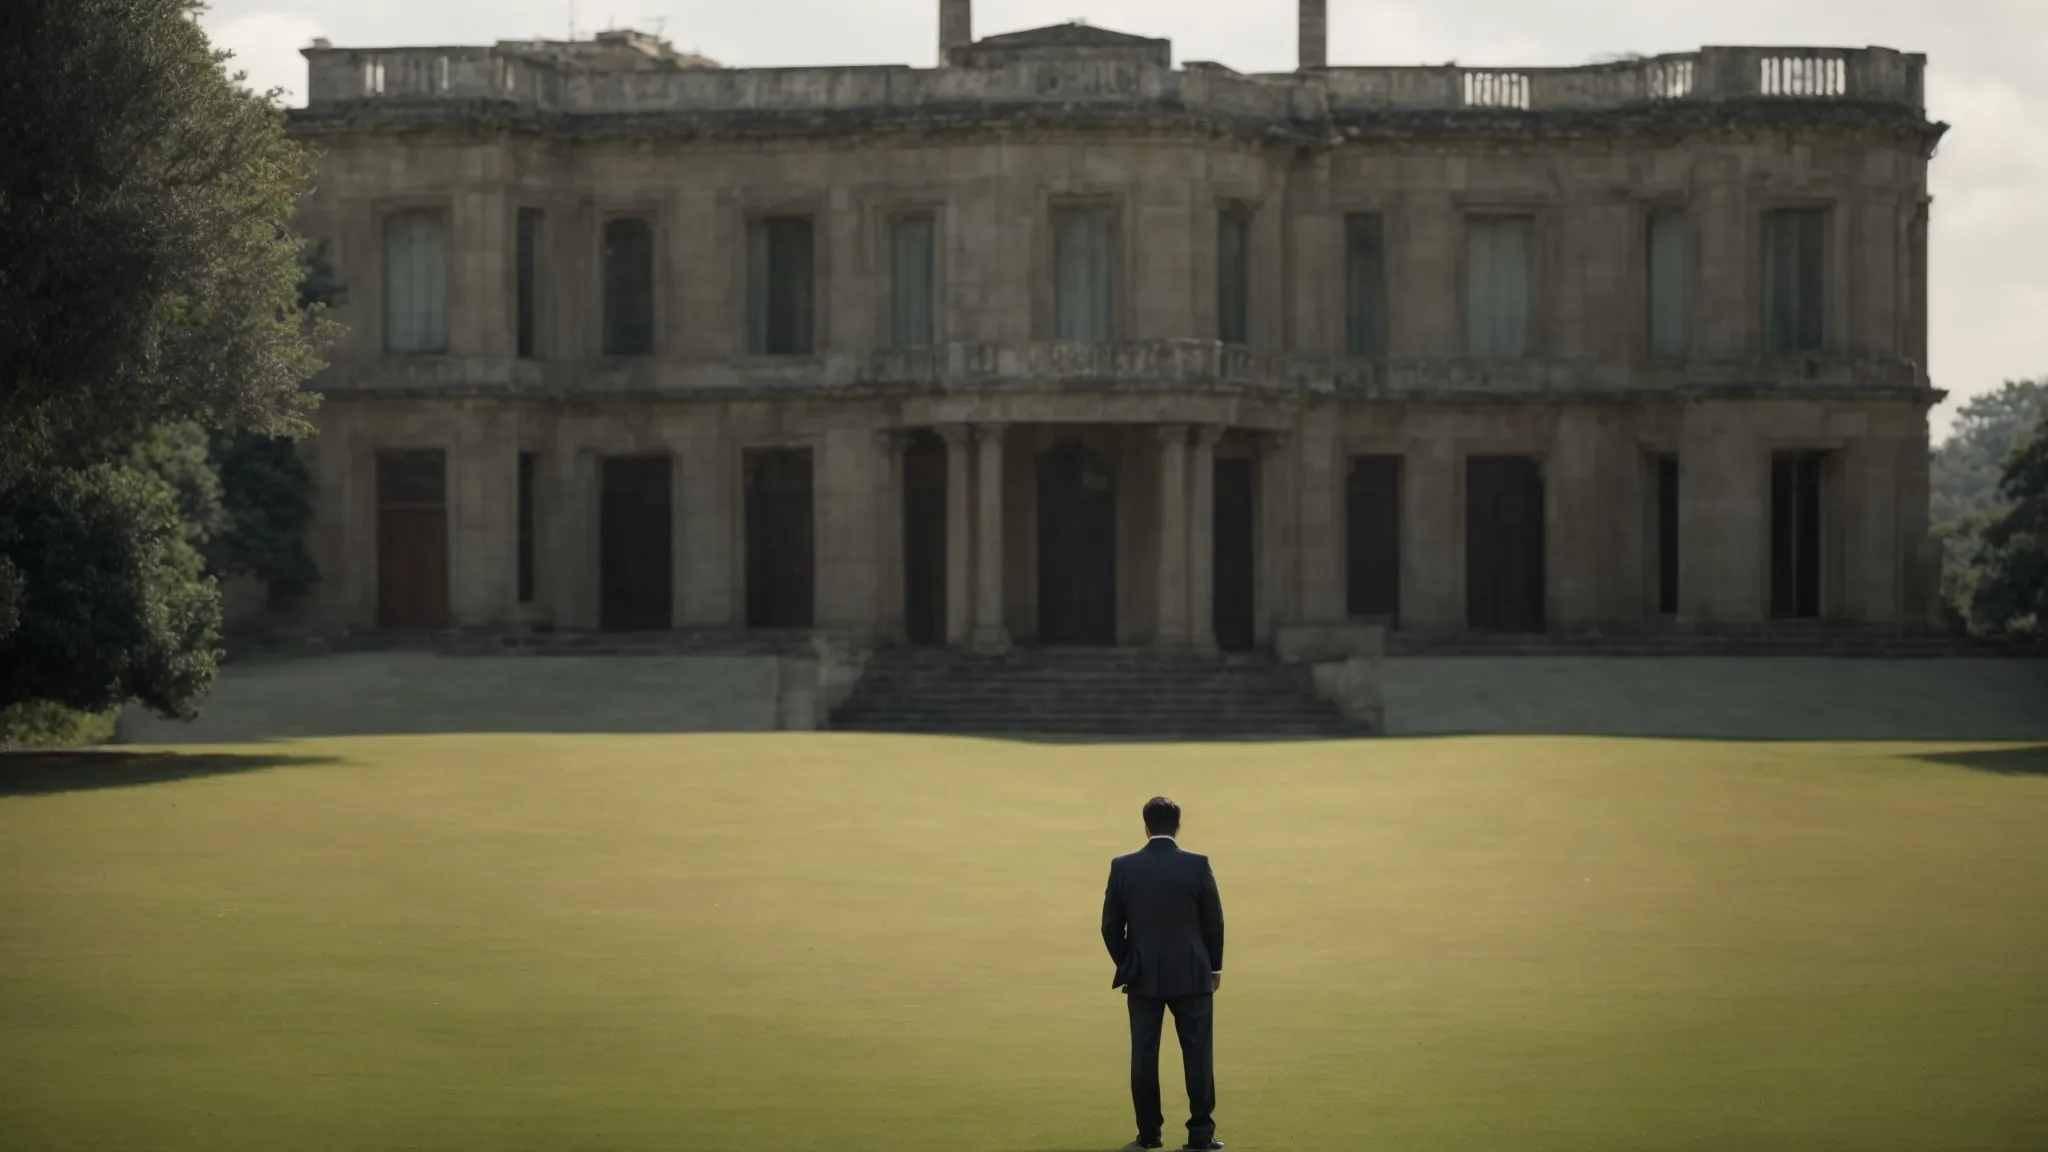 a solemn individual stands before a vast estate, contemplating its use as collateral in a high-stakes setting.